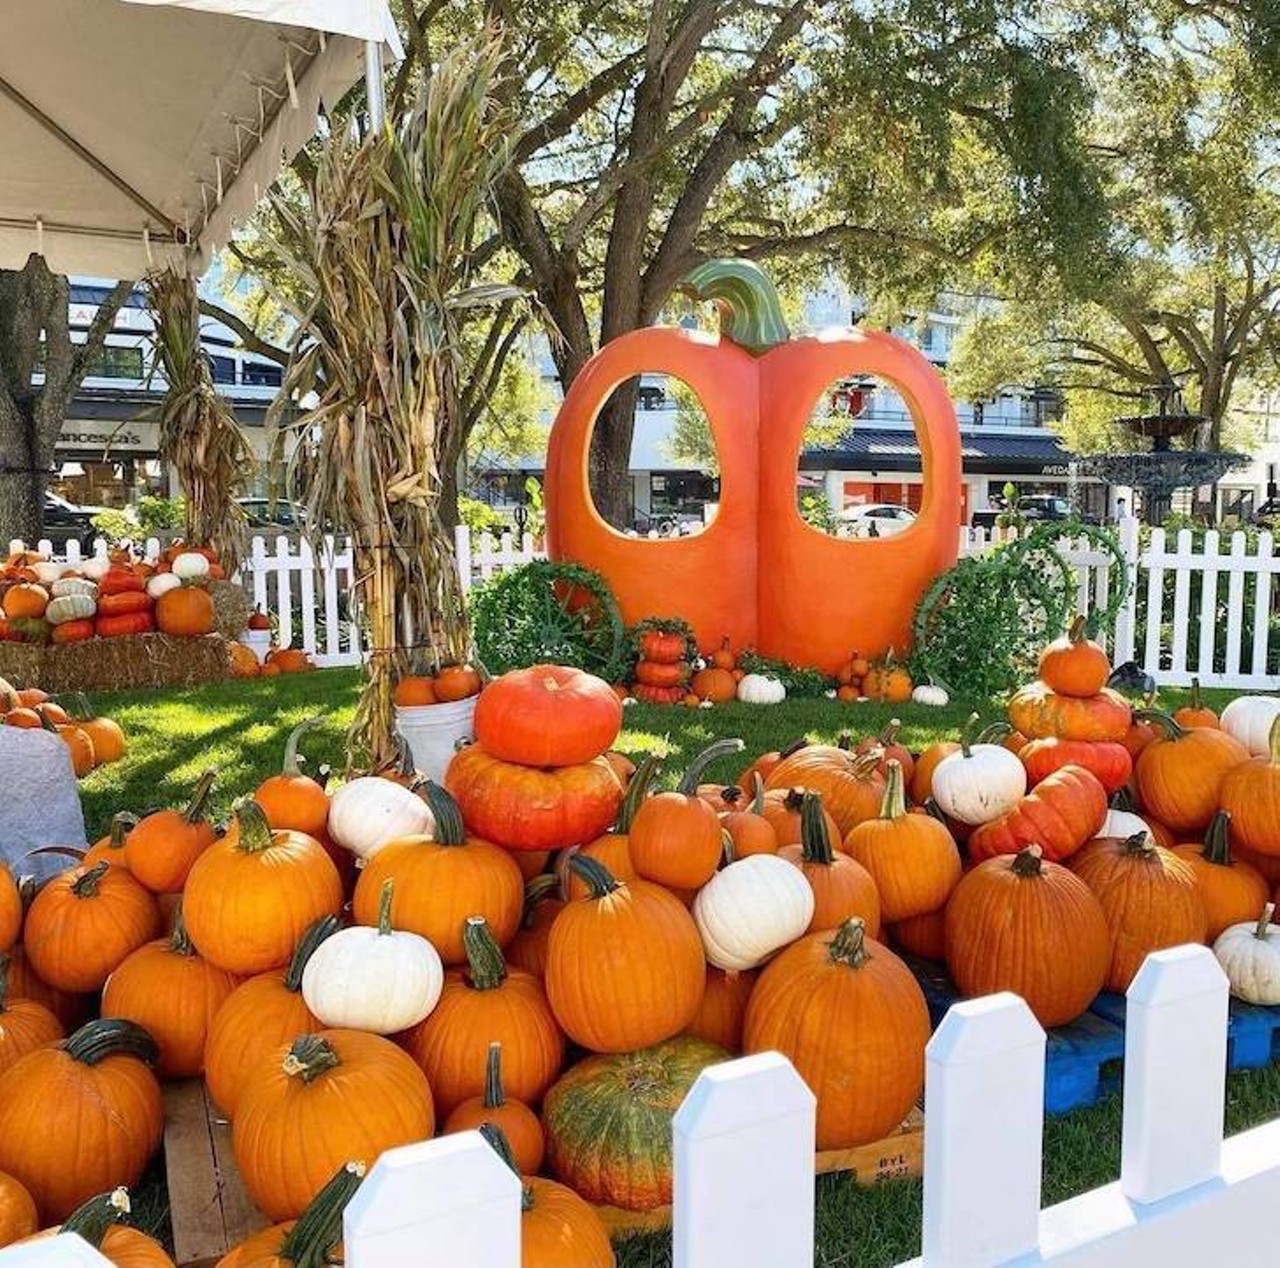 Hyde Park Village Pumpkin Patch
1602 Snow Ave., Tampa
Dates: through October 31
Hyde Park Village is hosting a pumpkin patch that the kids will love to stroll through. Open Monday-Thursday  from 3 p.m. to 6 p.m., and Friday-Sunday 10 a.m. to 6 p.m. A portion of the proceeds will benefit the Humane Society of Tampa Bay. Did we mention the crazy amount of orange pumpkins to choose from?